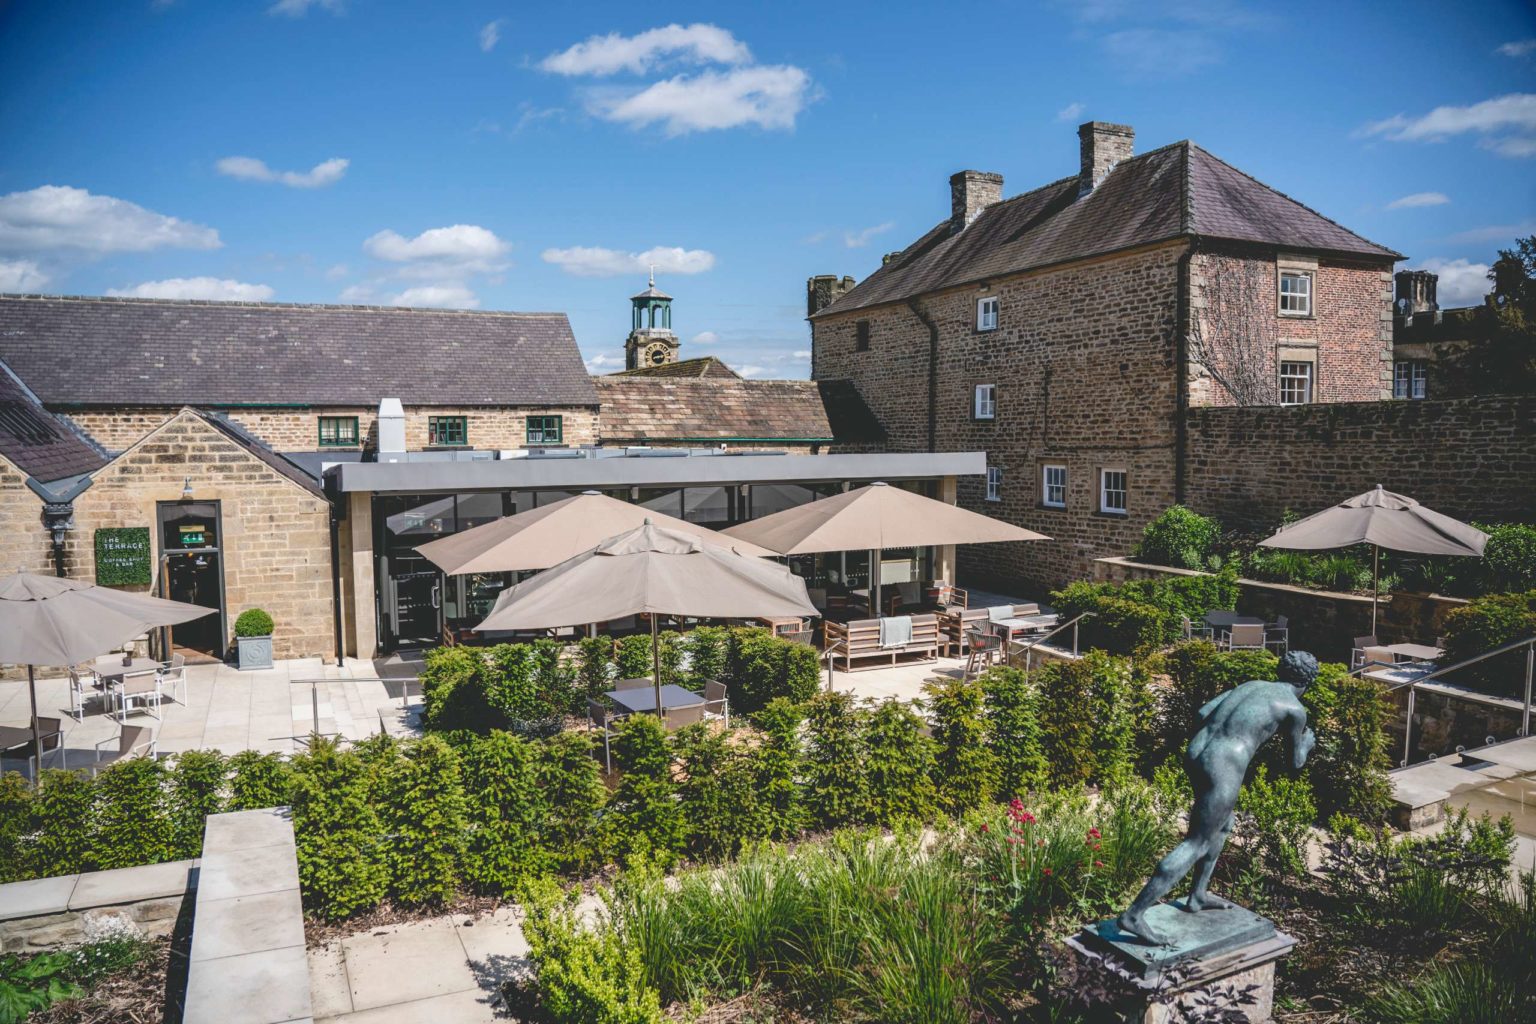 The exterior courtyard of The Terrace Restaurant and Bar on the Swinton Estate in North Yorkshire